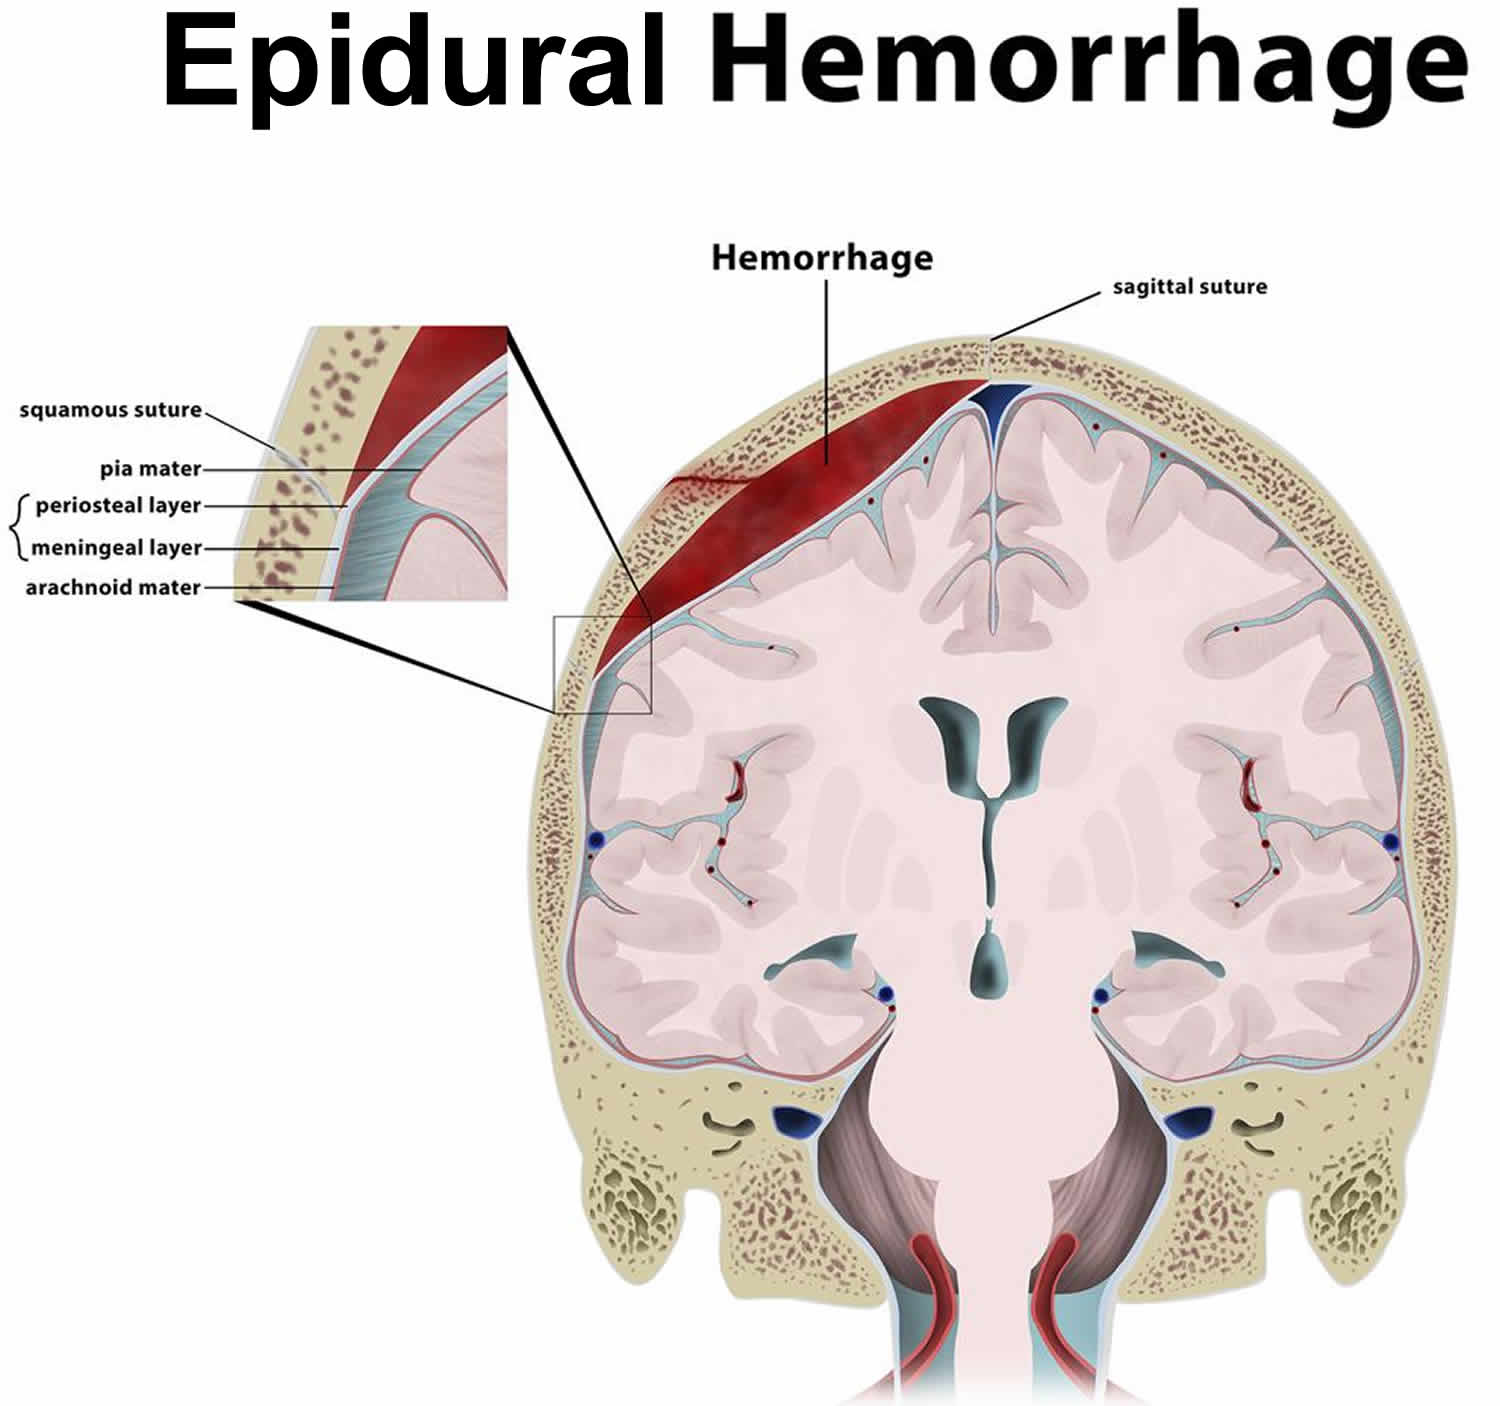 What is the most common cause of epidural hematoma?